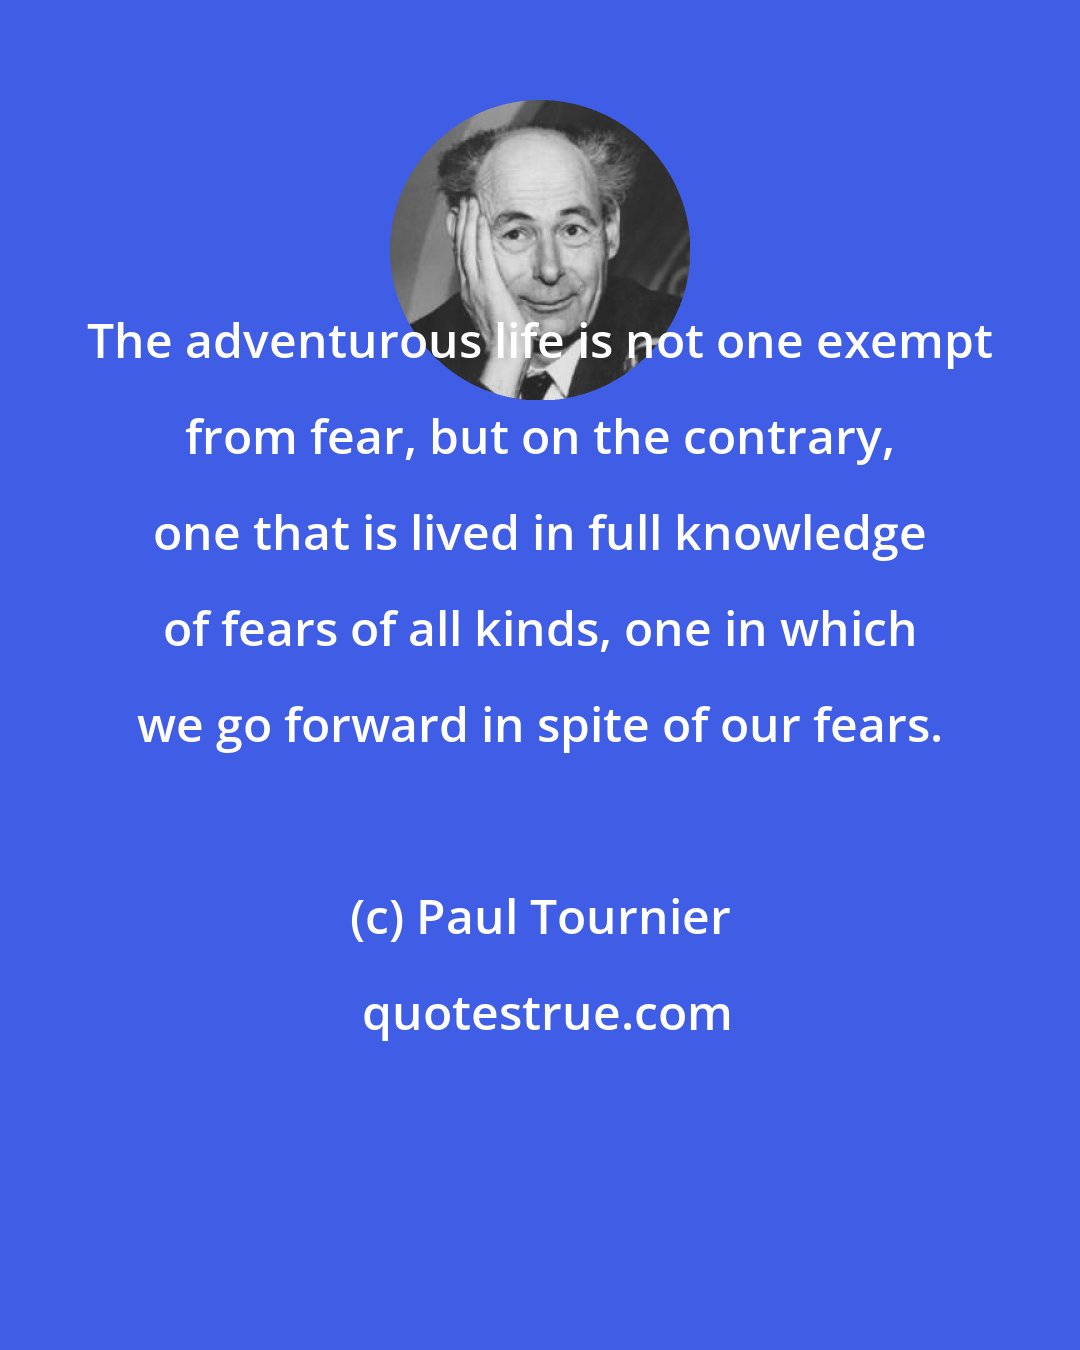 Paul Tournier: The adventurous life is not one exempt from fear, but on the contrary, one that is lived in full knowledge of fears of all kinds, one in which we go forward in spite of our fears.